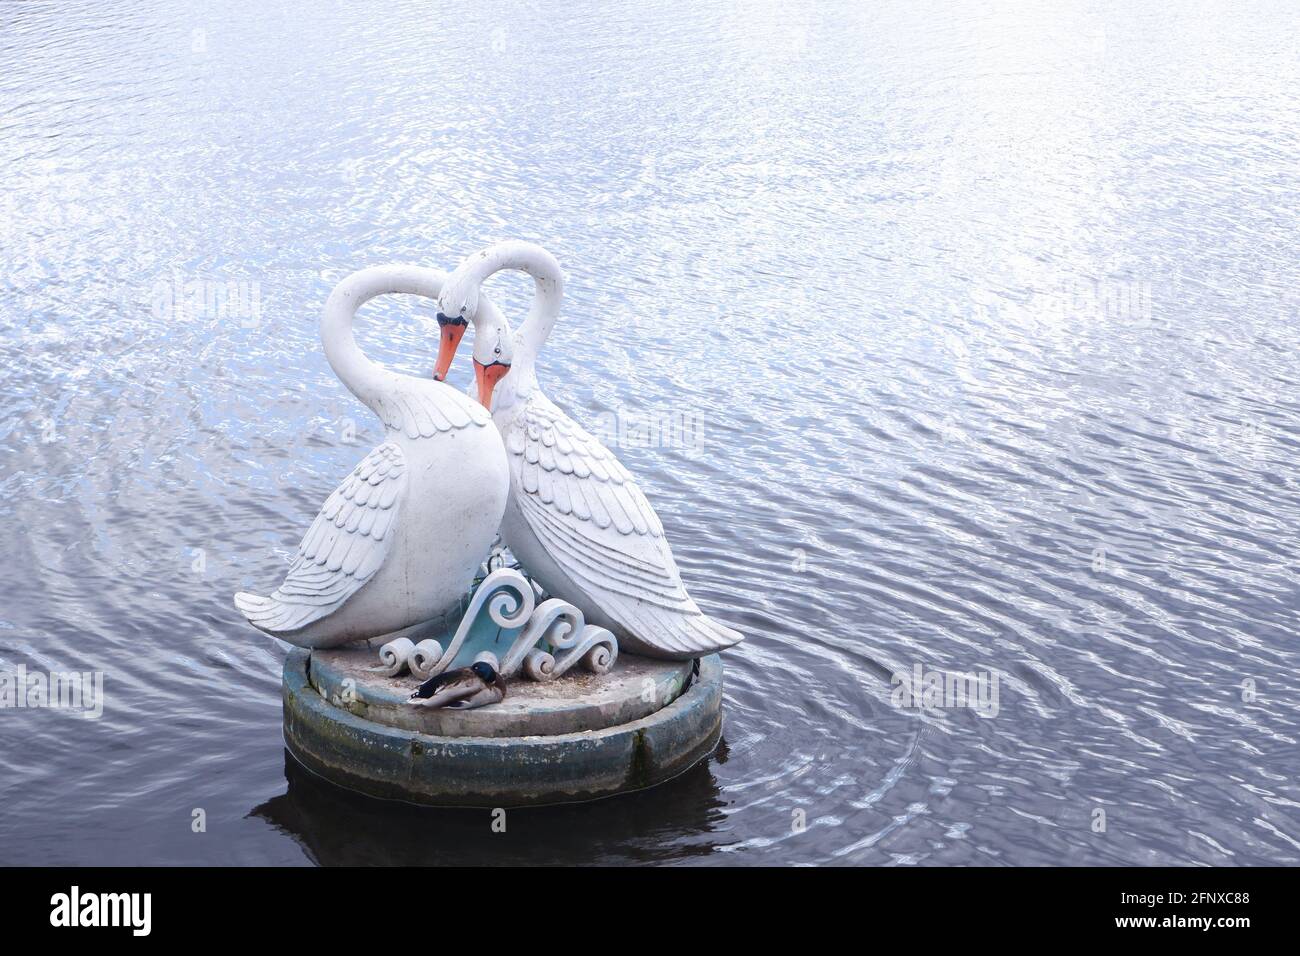 A sculpture in the form of two white swans as a symbol of eternal love and devotion. Stock Photo